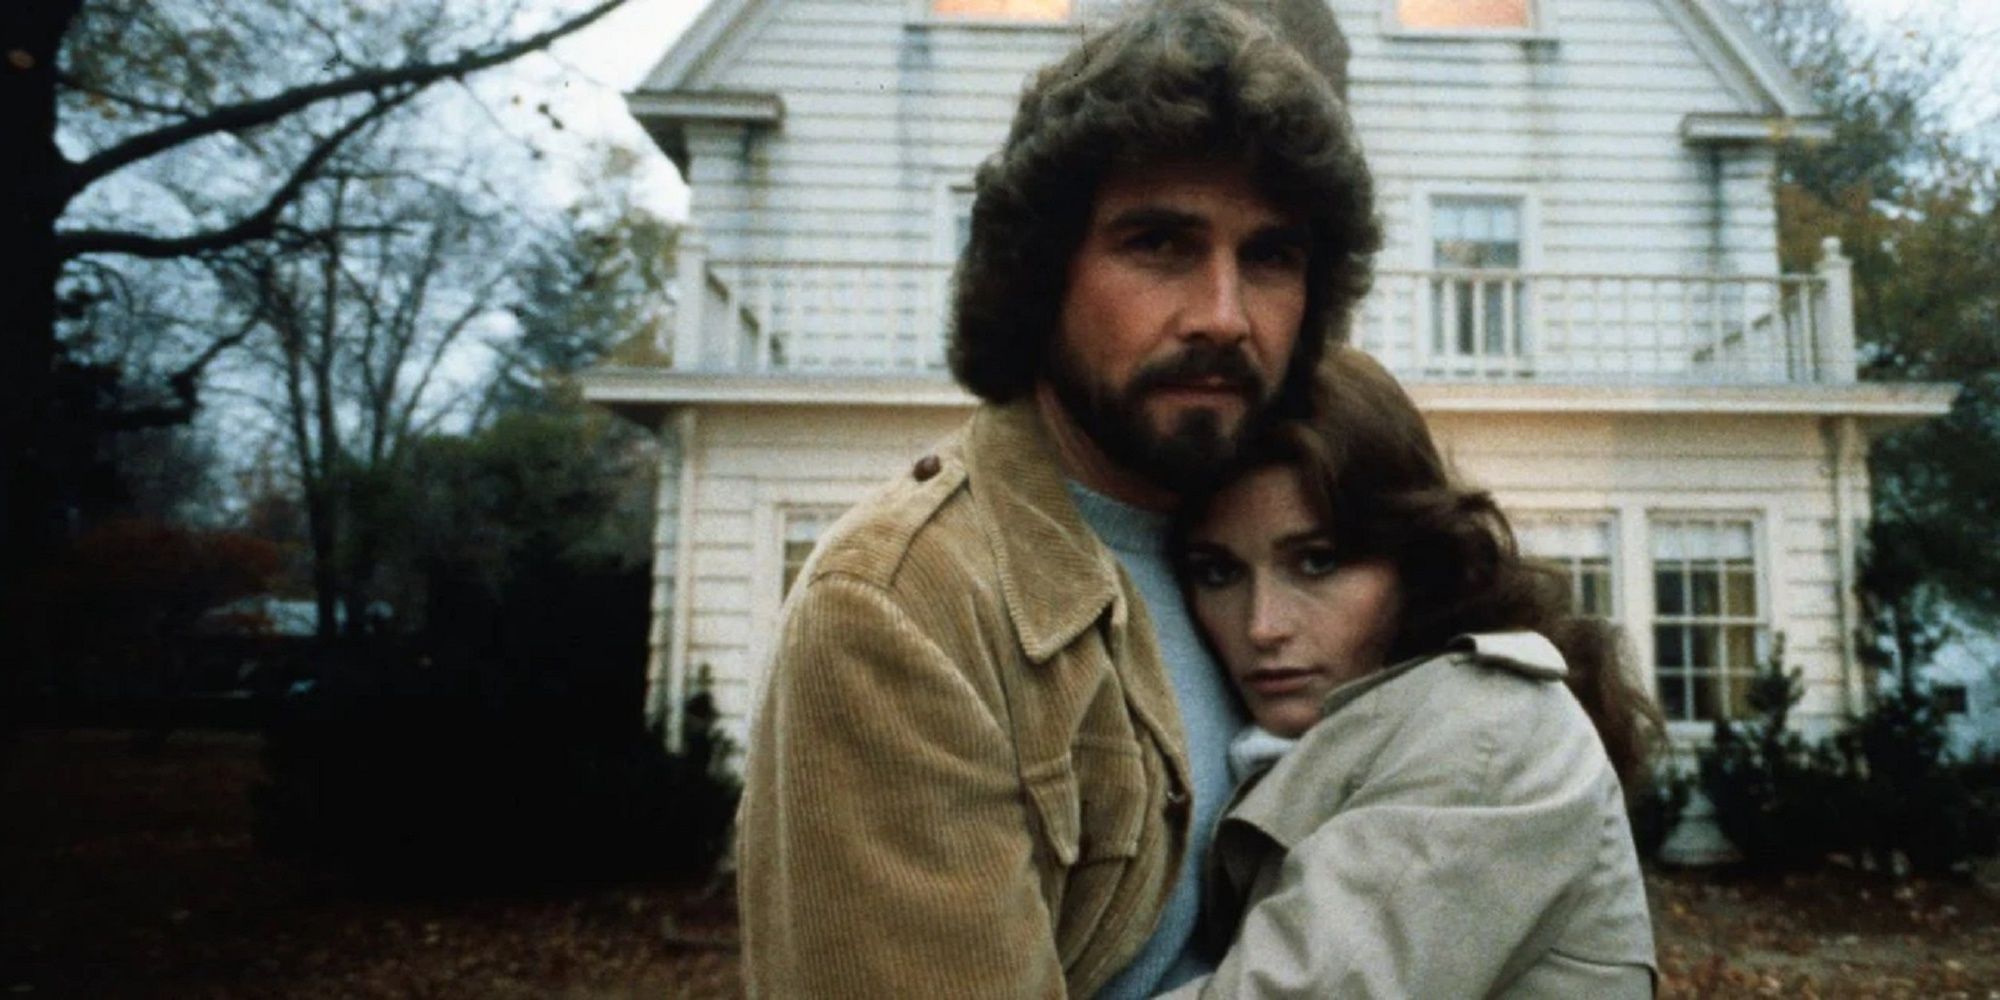 The family in front of their terrifying house in 'The Amityville Horror.'